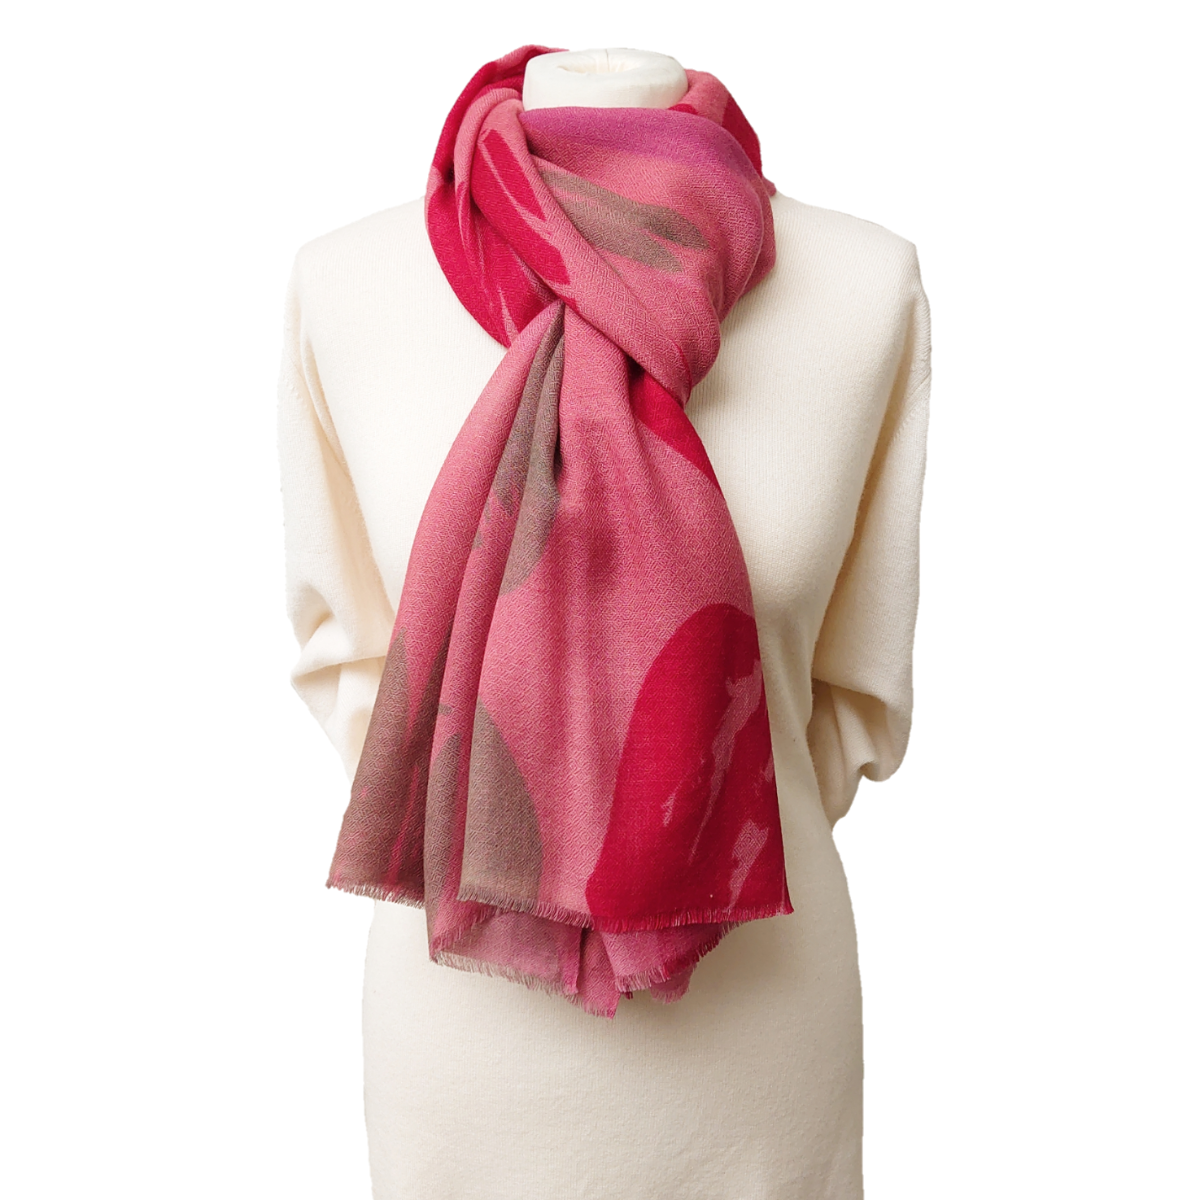 Ltd Edition 100% Pure Pashmina Cashmere Stole - Large Scarf - Vintage Rose with Red Flowers